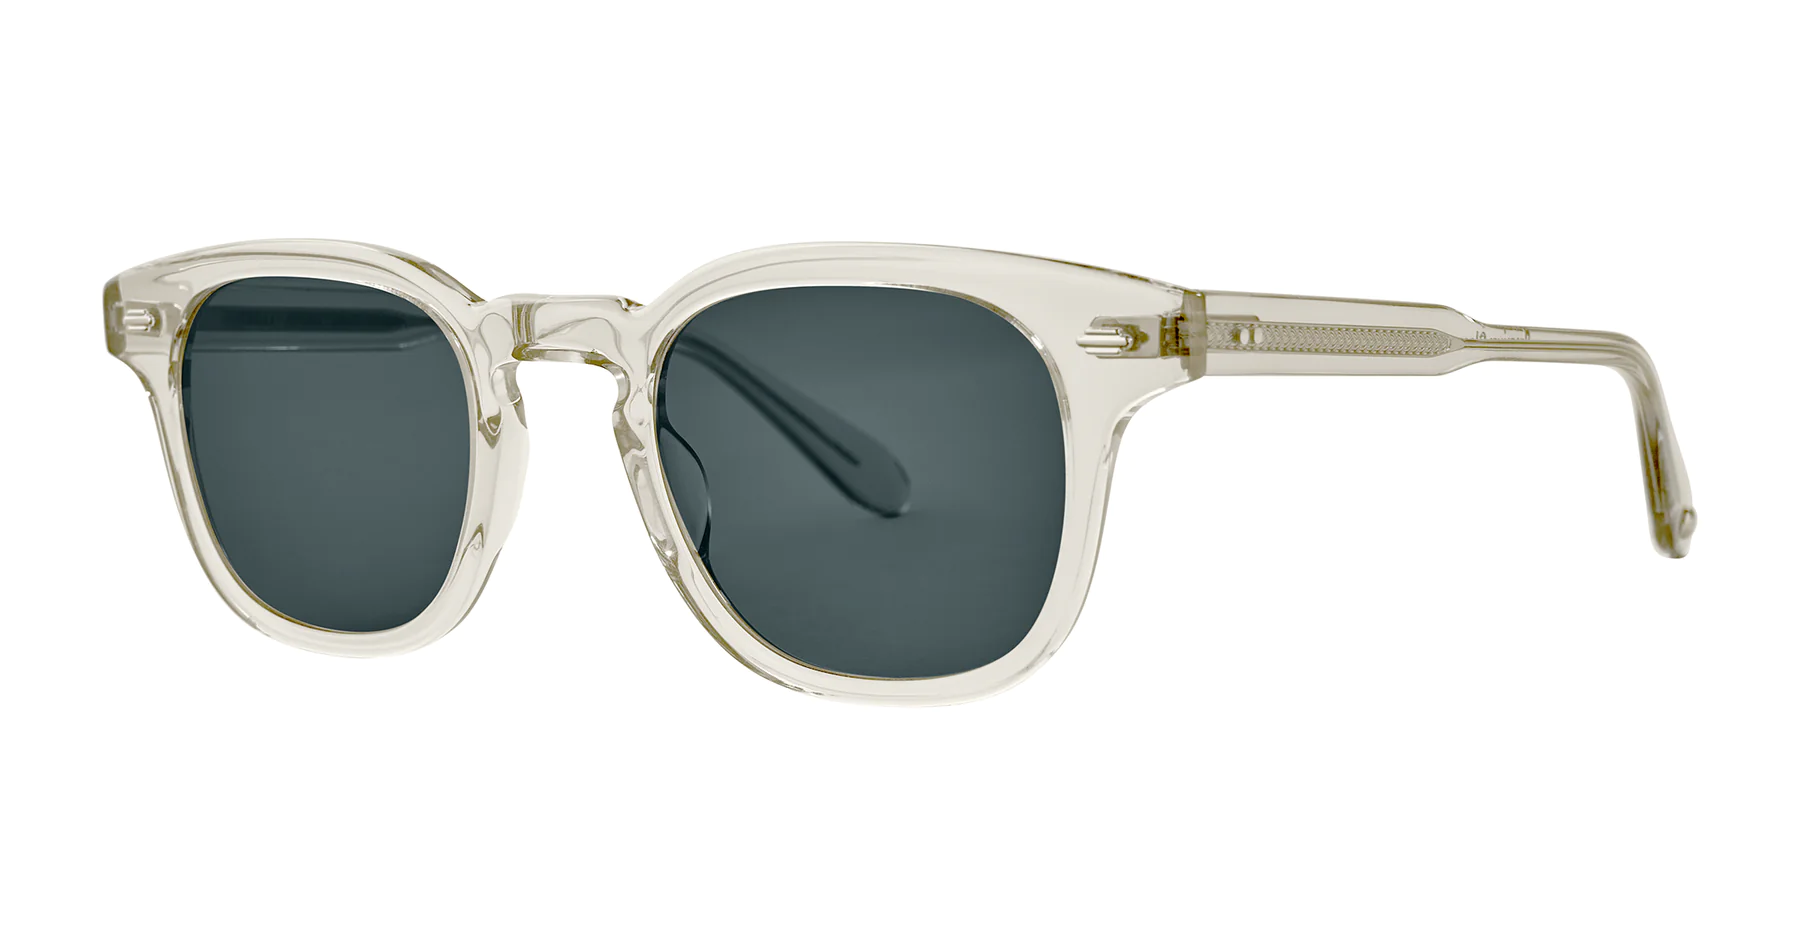 Sunglasses_Sherwood_2154_CH_PBS_2_1800x_9cd5514d-6664-484f-a7e2-f6fc10825c9b.png